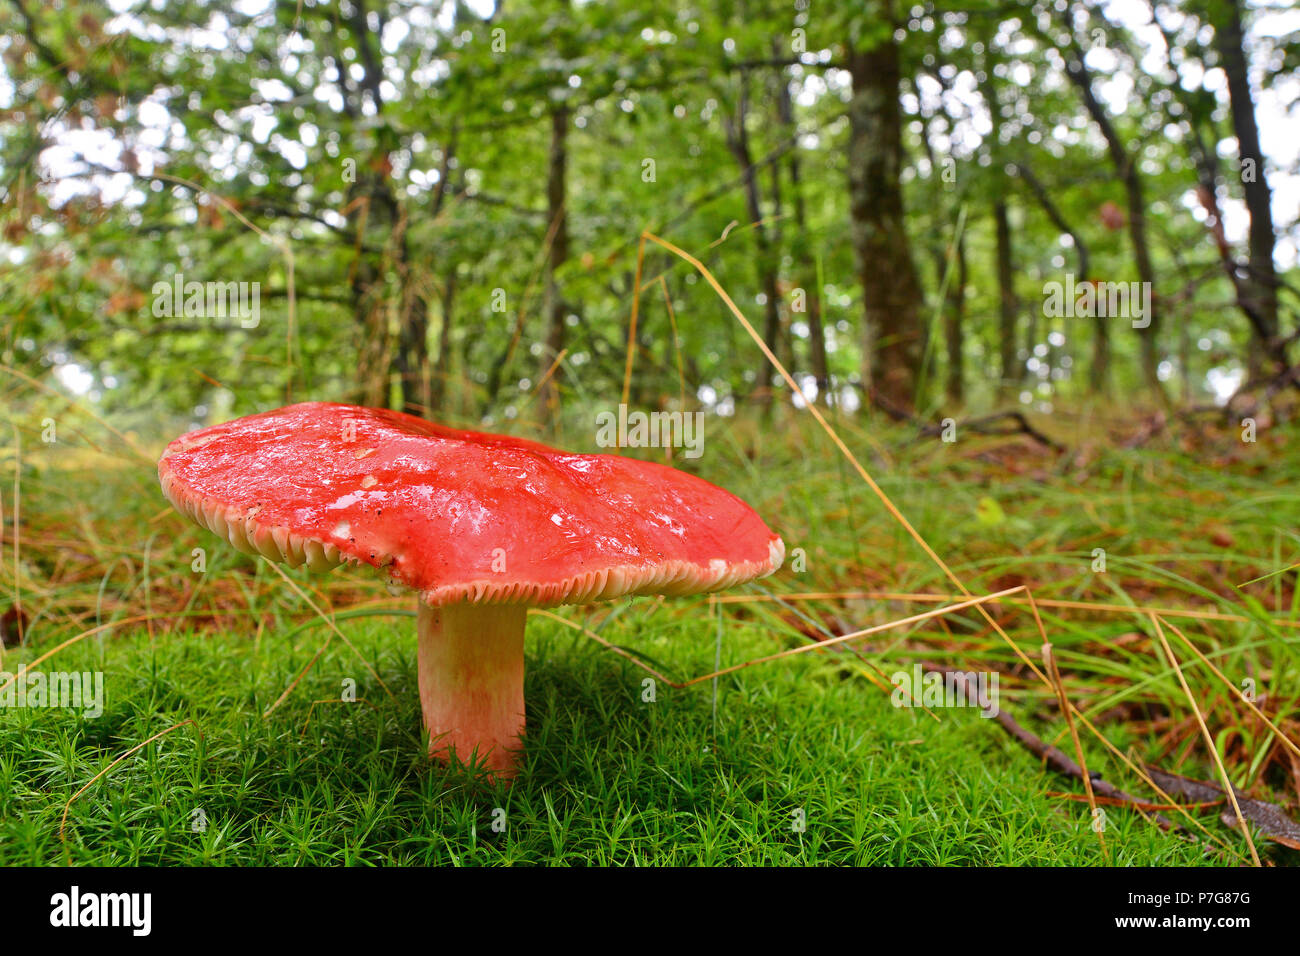 russula sanguinaria mushroom in the forest Stock Photo